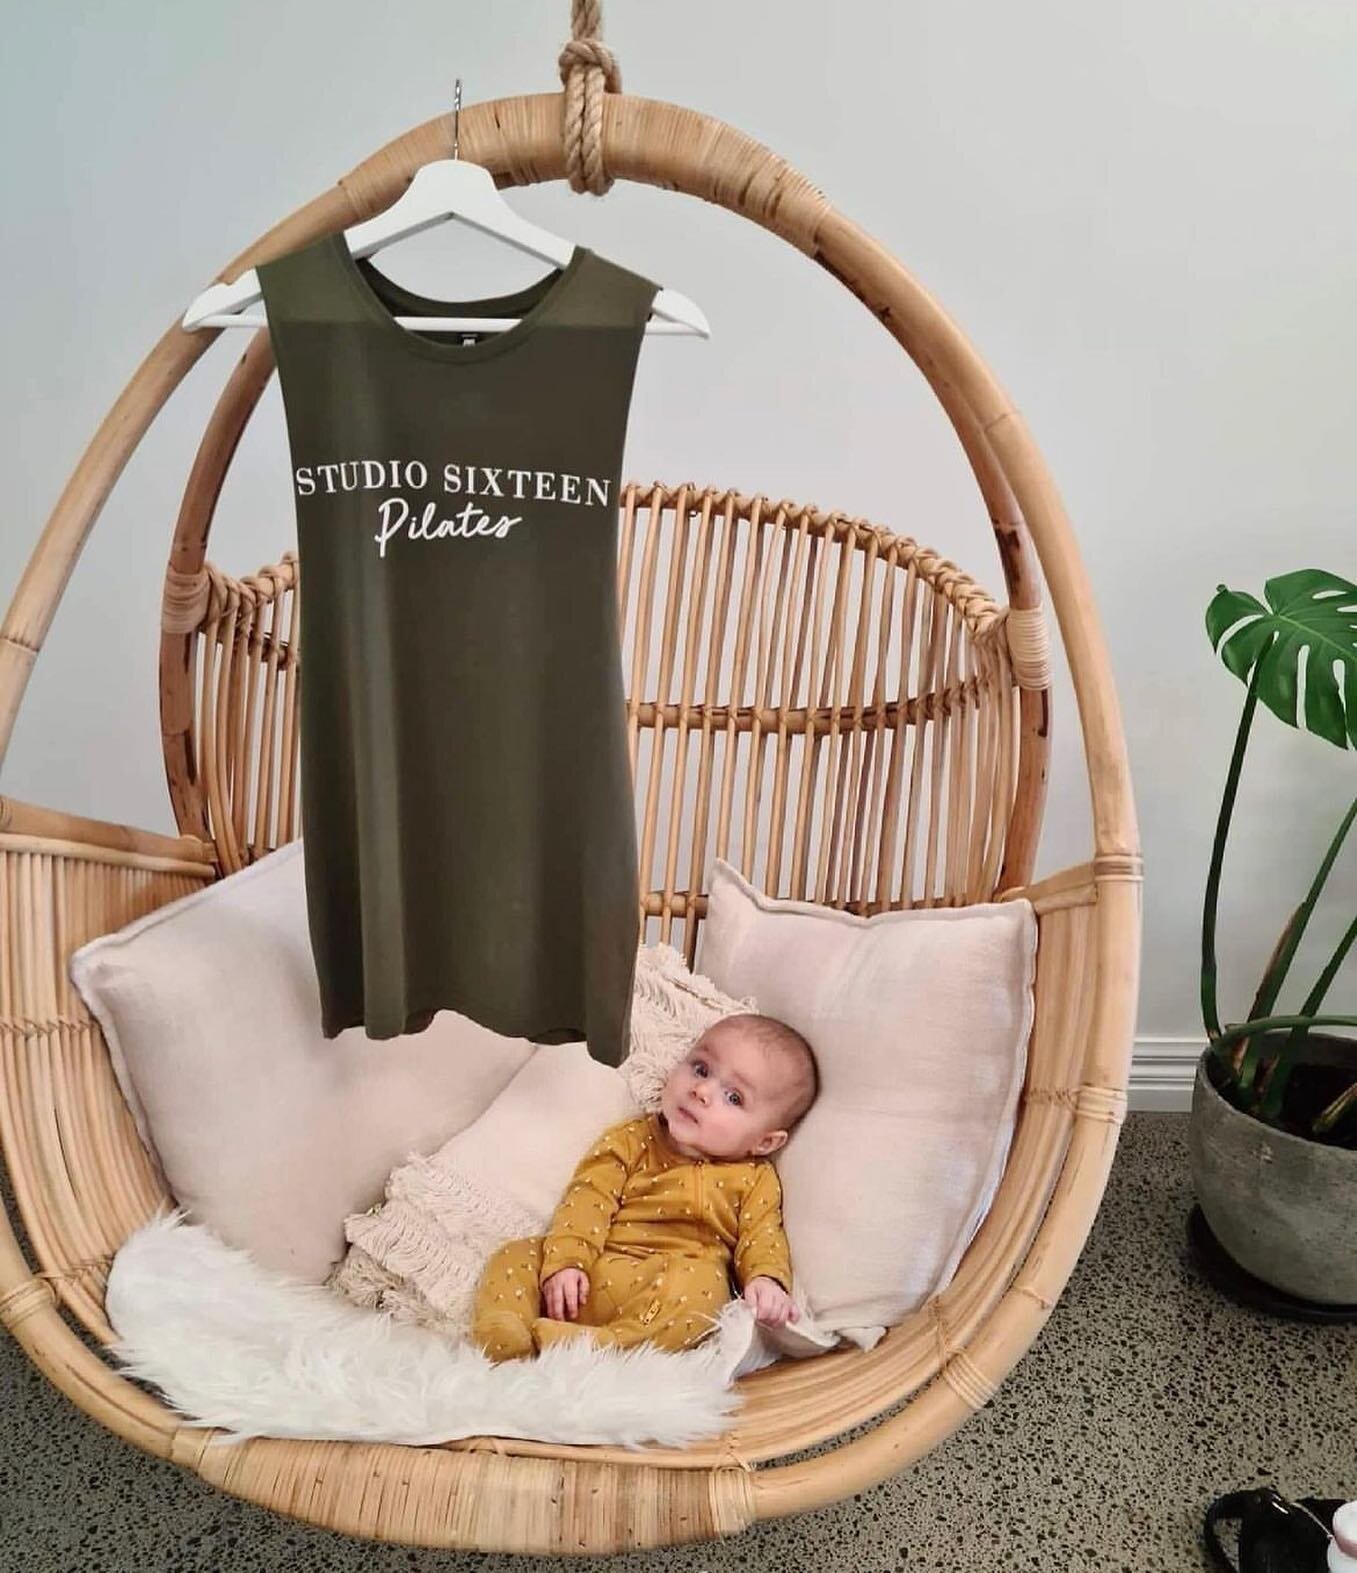 What&rsquo;s cuter than babies and our studio sixteen merch? &hellip; I&rsquo;ll wait☺️
Did you know we offer pre and postnatal Pilates! They&rsquo;re at 11am every Tuesday with the amazing Danny🙌🏼🤍

Whether you&rsquo;re preparing for birth, stren